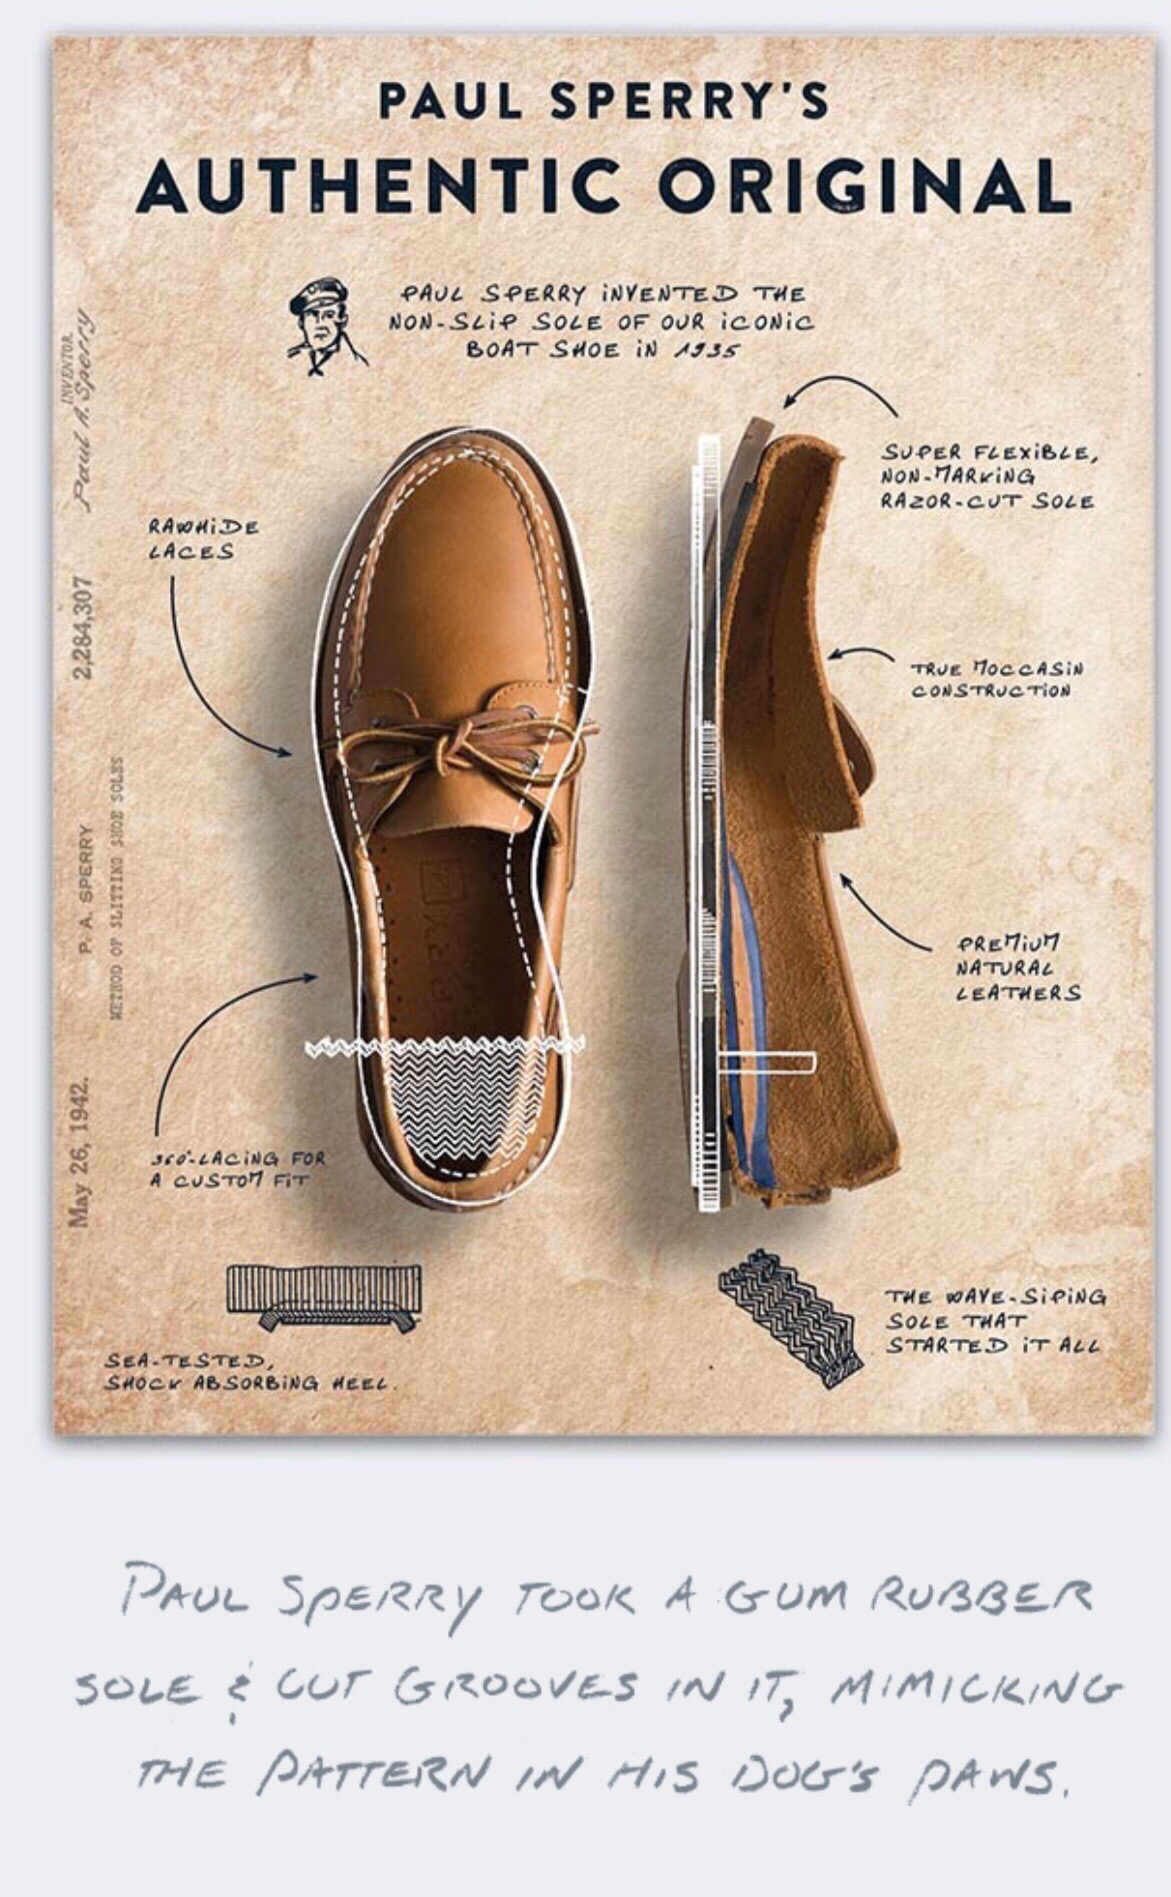 cassie goodwin share sperry insole coming out photos